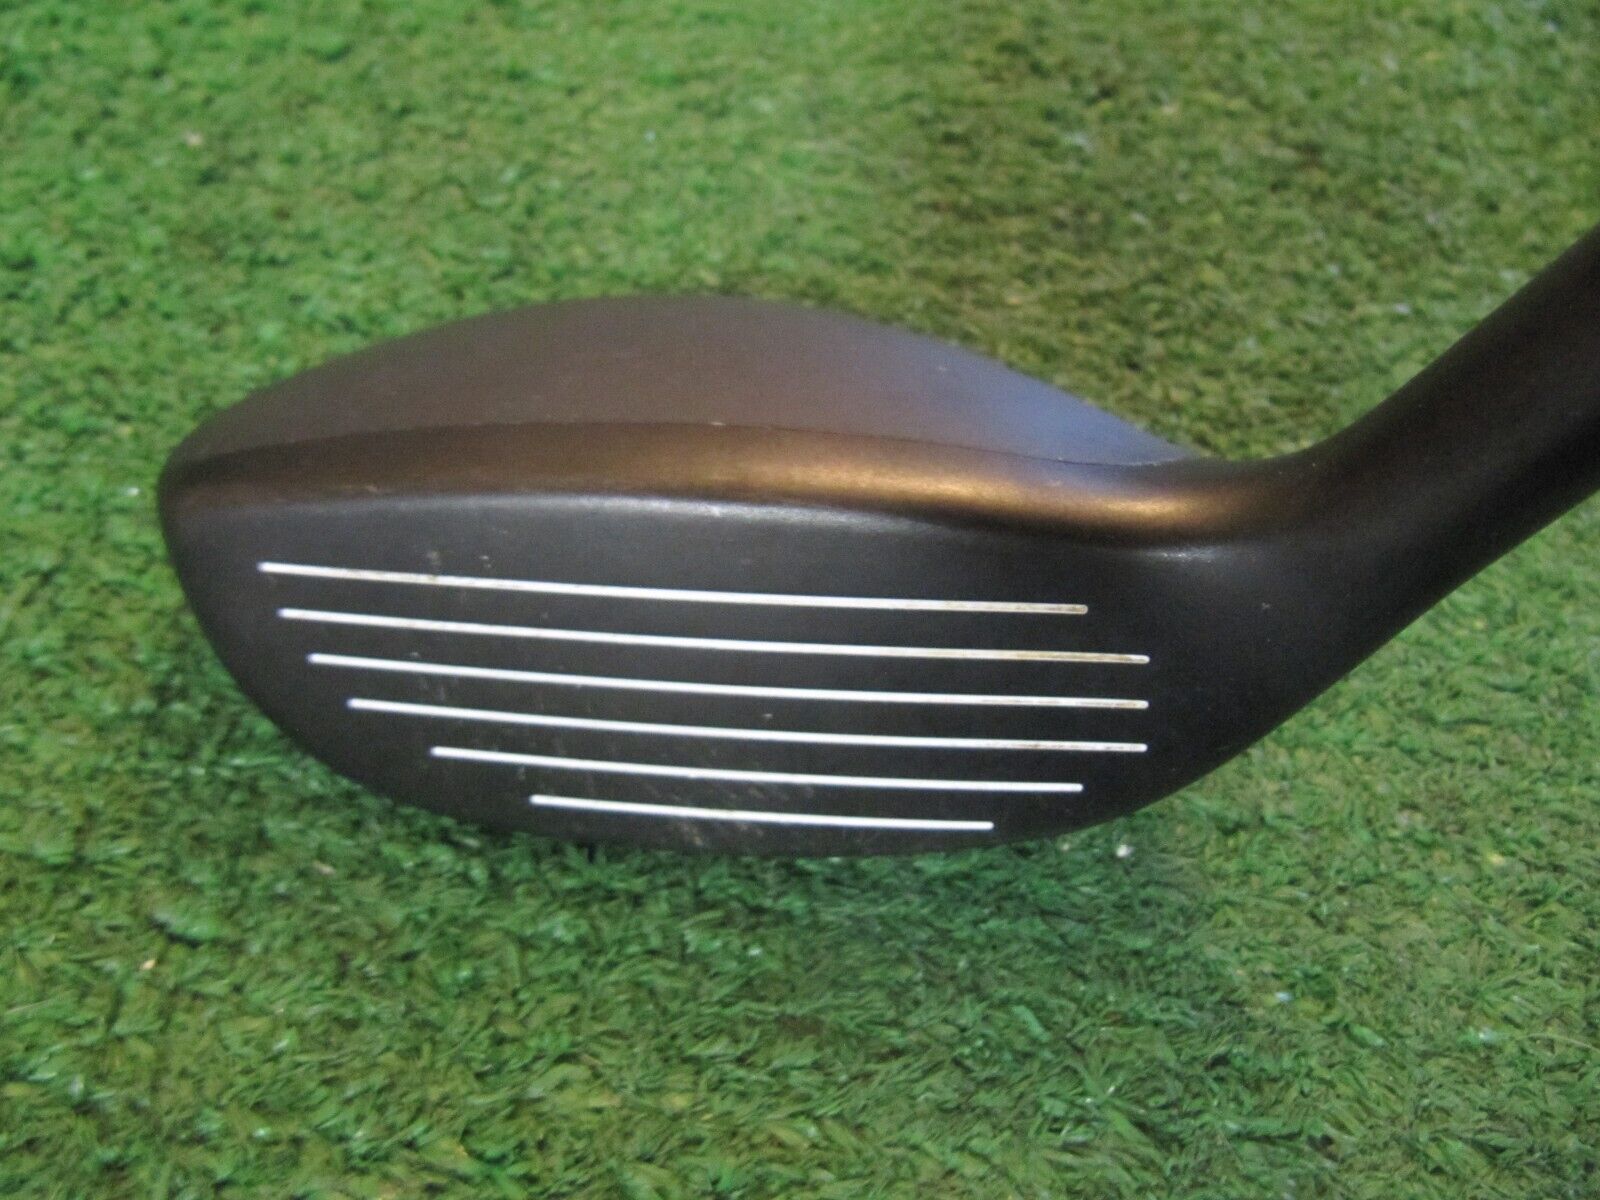 PING G30, 26 DEGREE 5 HYBRID, PING TFC 80 LITE FLEX GRAPHITE SHAFT WITH COVER